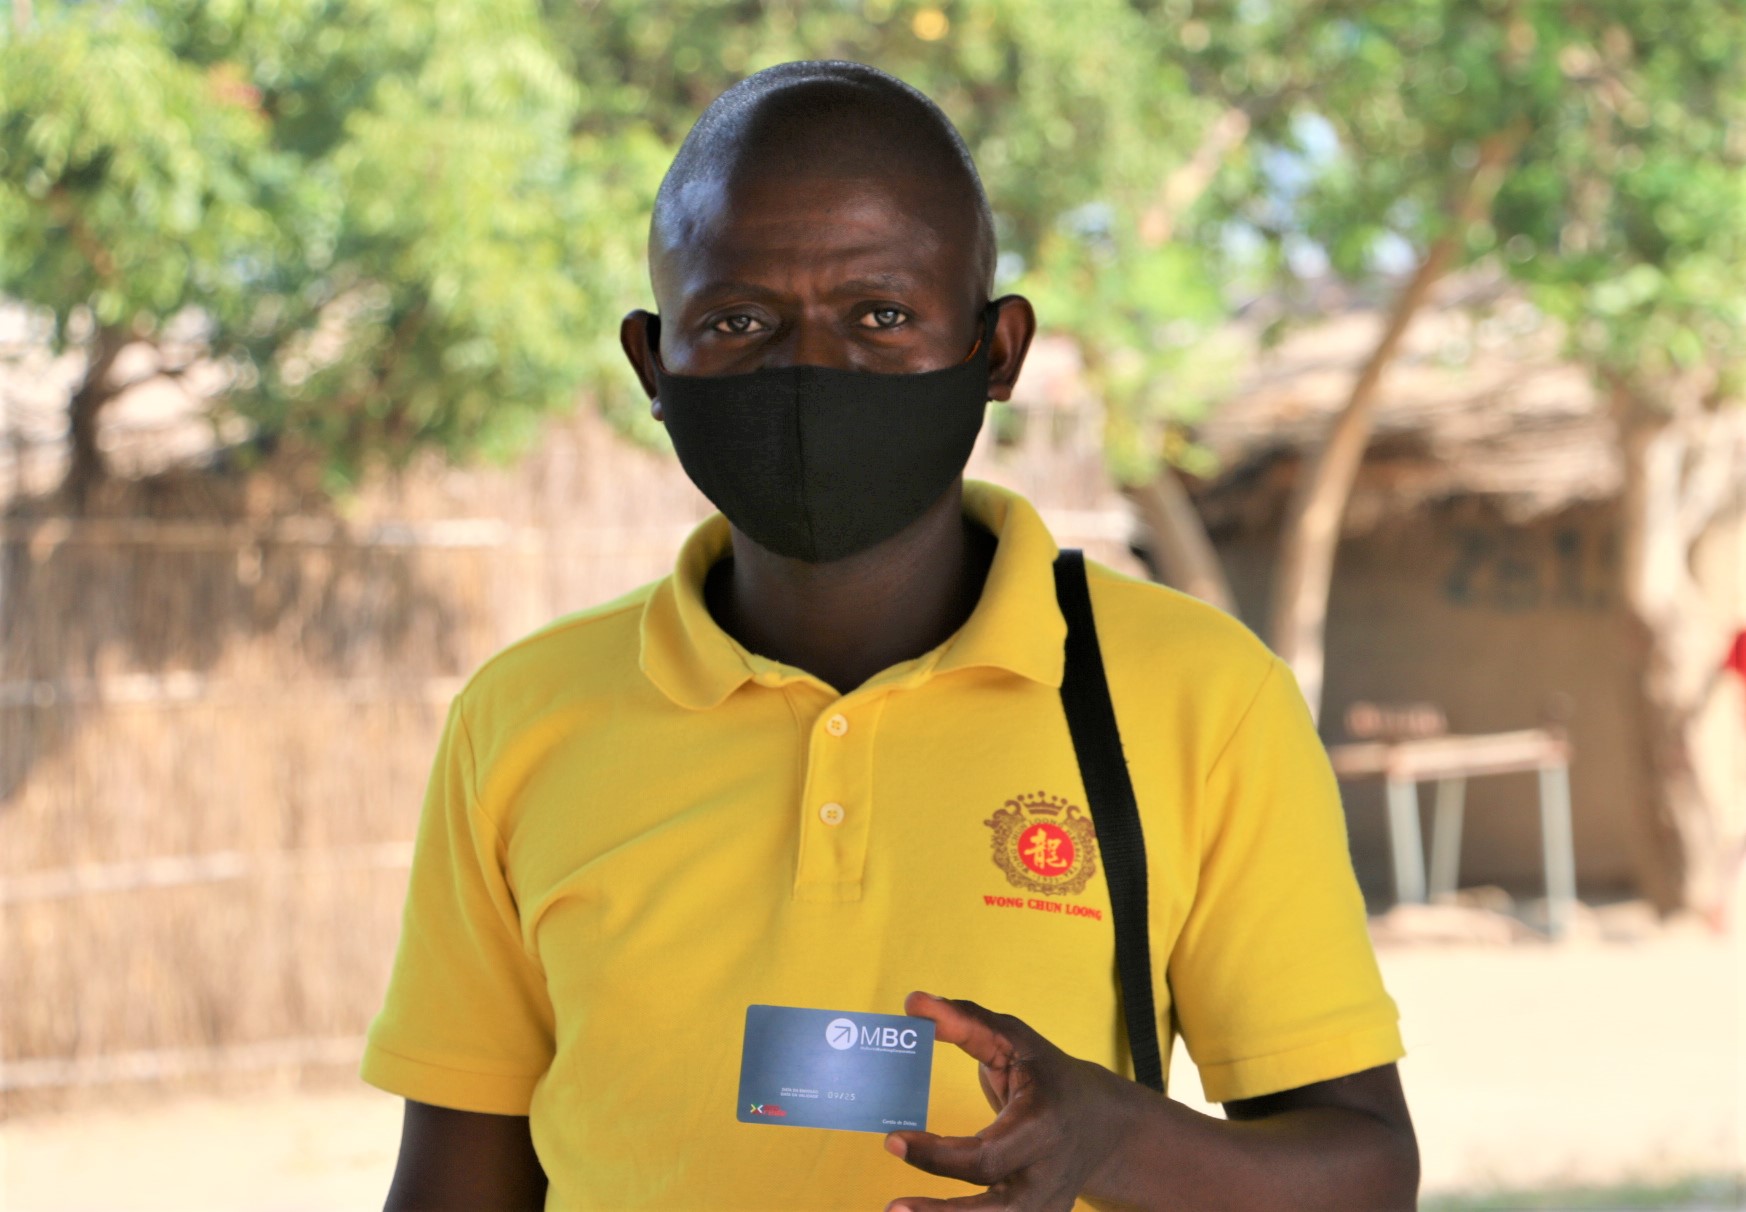 Refugee holding his first bank card as a symbol of financial inclusion in Maratane settlement, Nampula. 